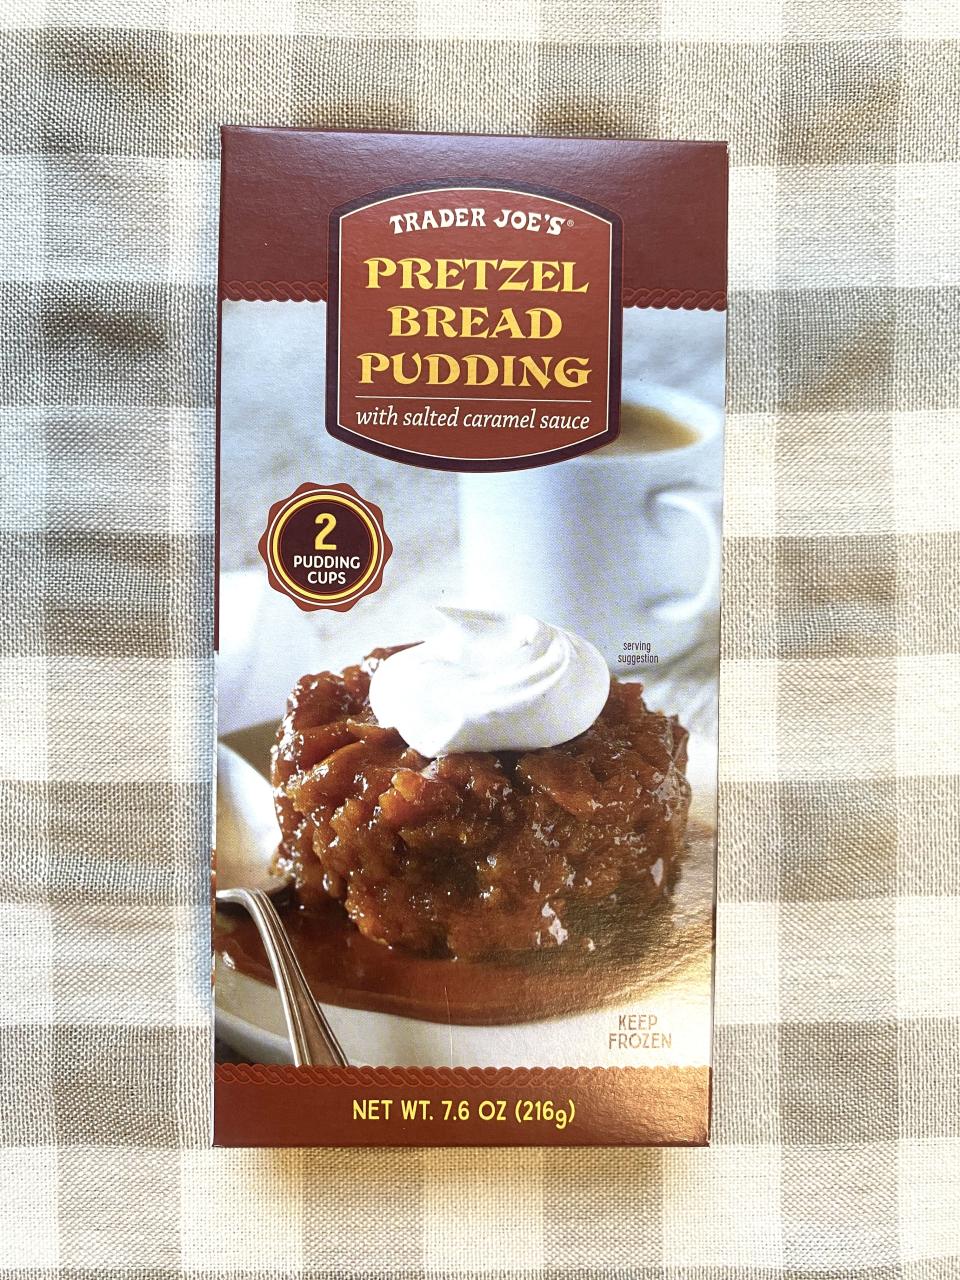 A box of Trader Joe's Pretzel Bread Pudding With Salted Caramel Sauce